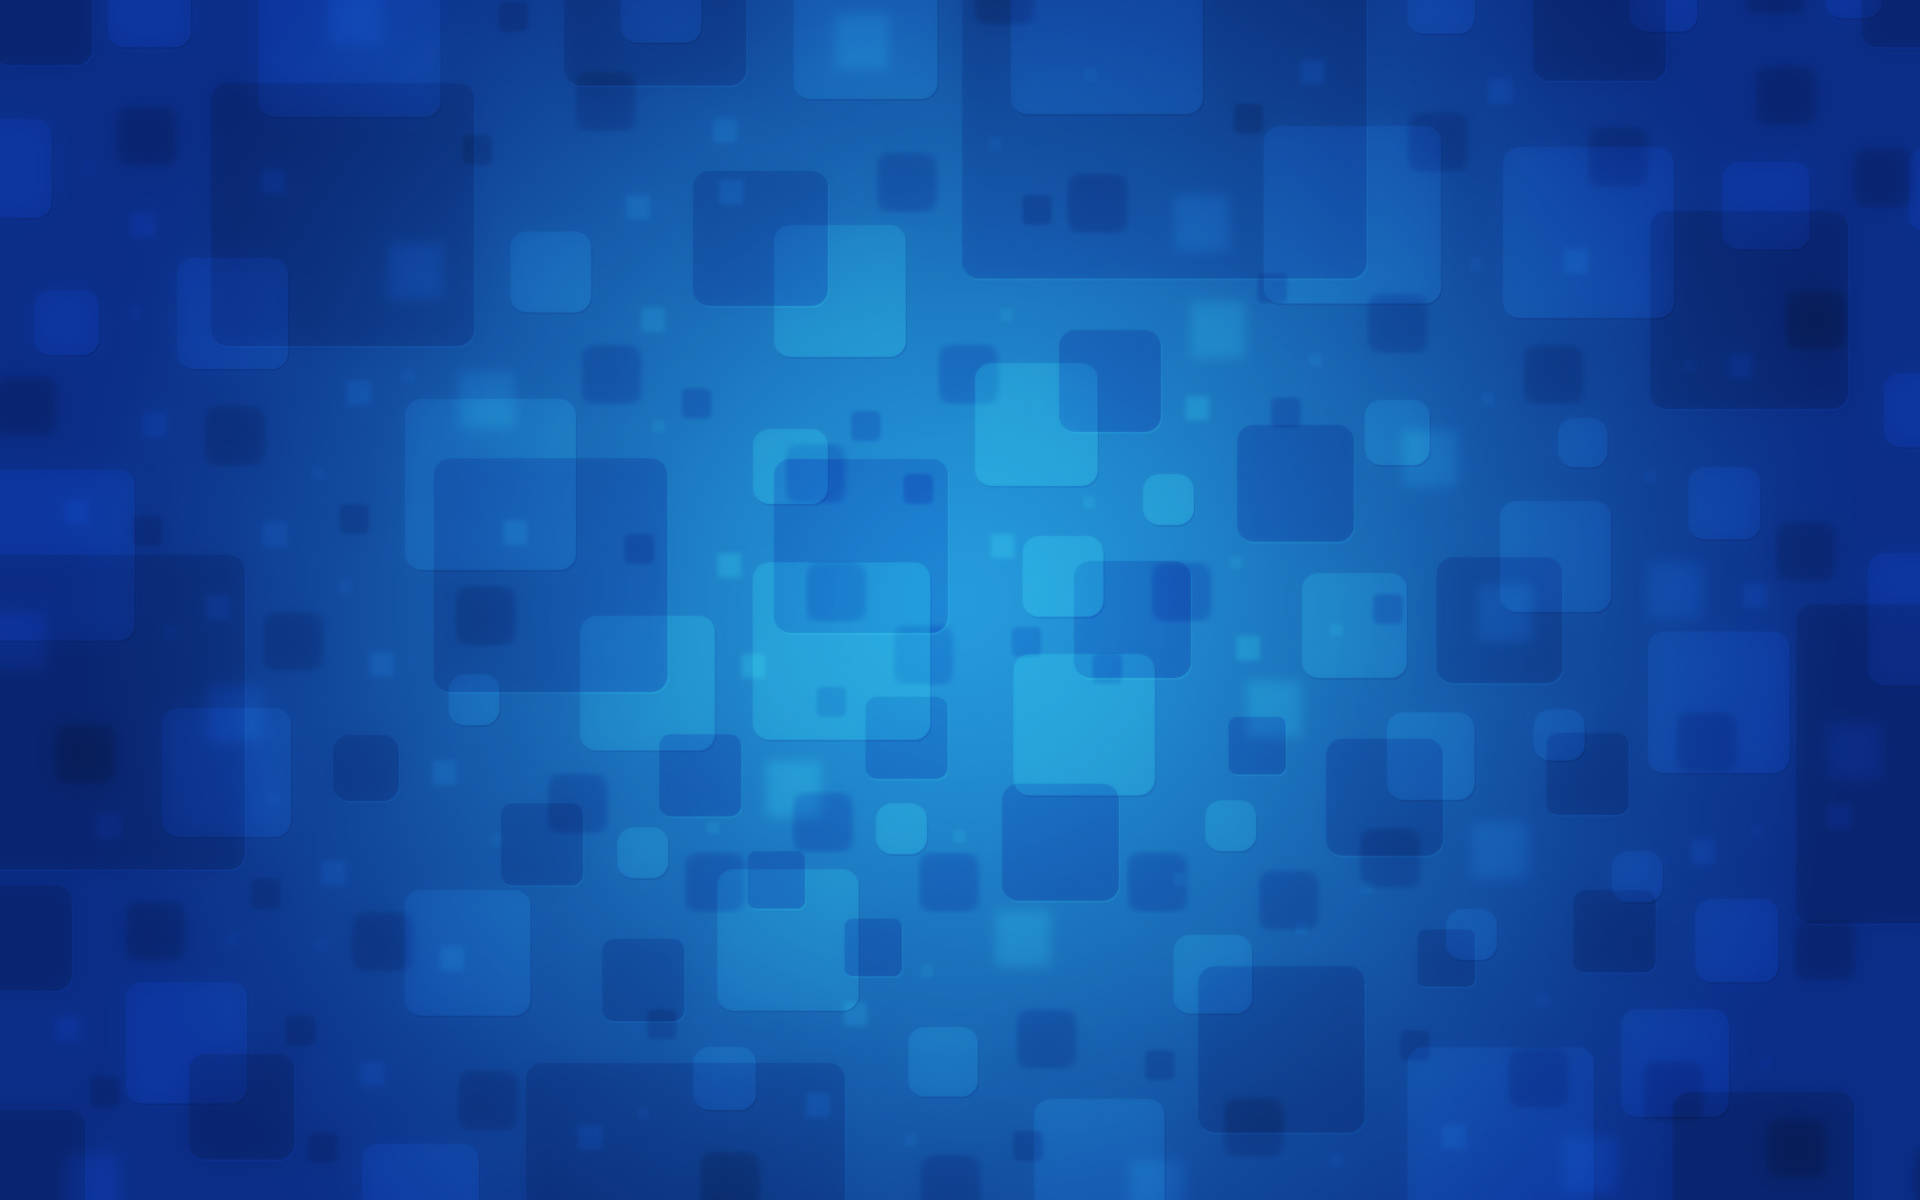 Dark Blue Square Patterns Picture